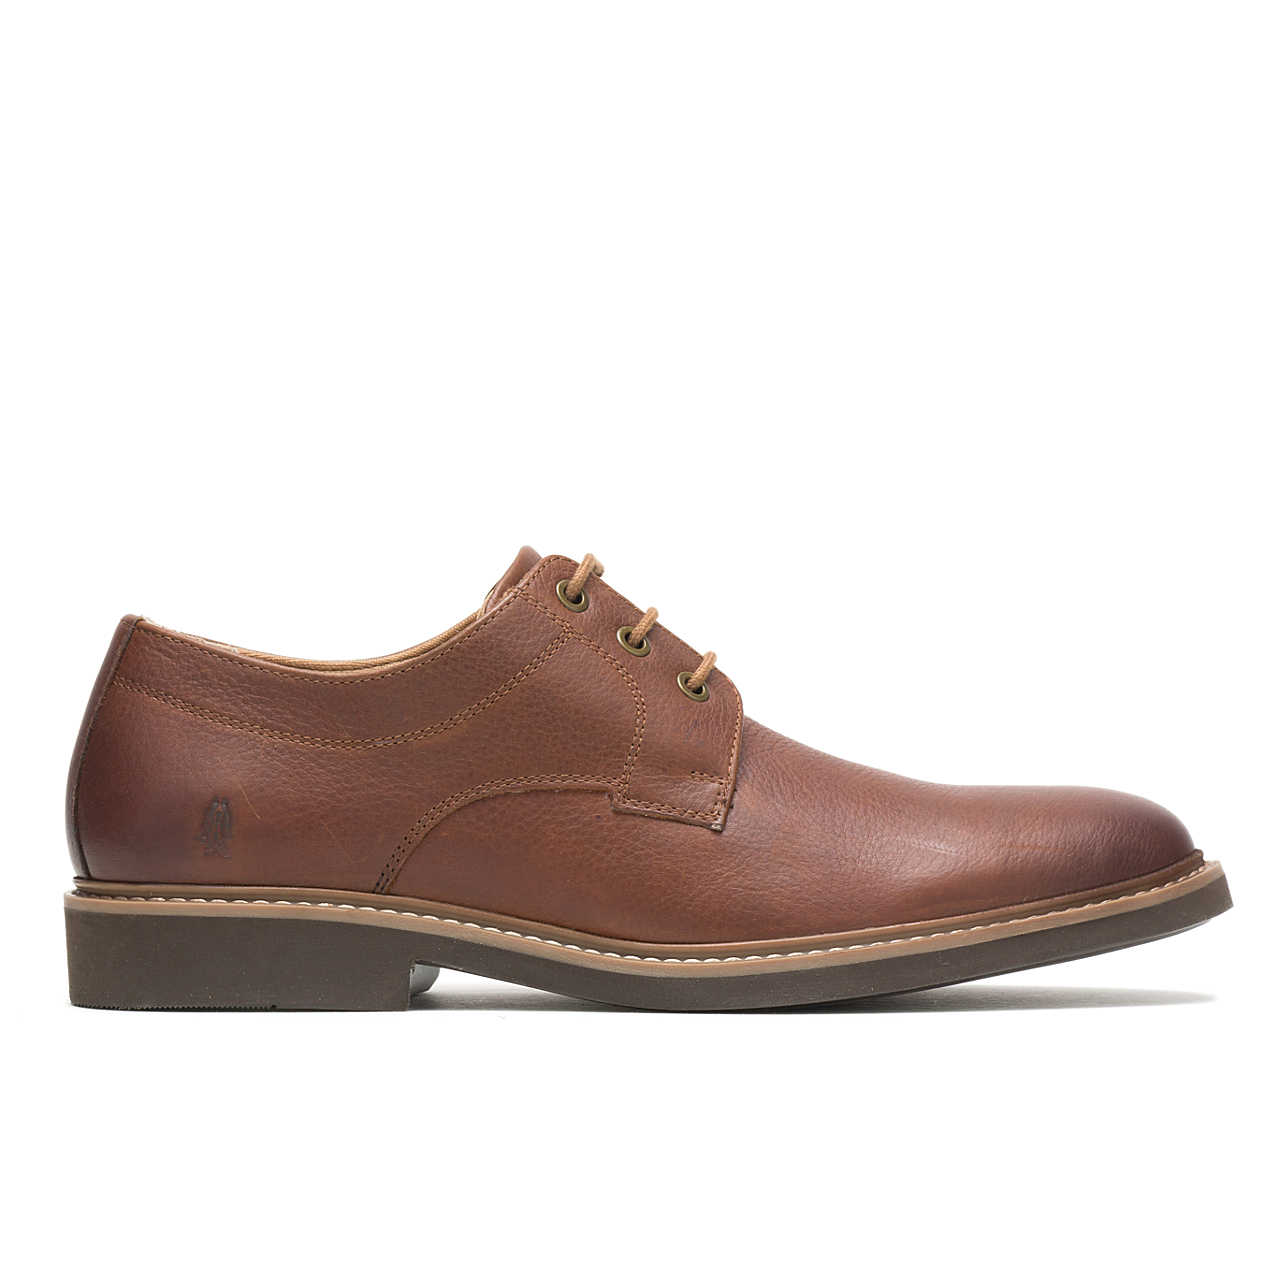 Men's Comfortable & Casual Shoes | Hush Puppies